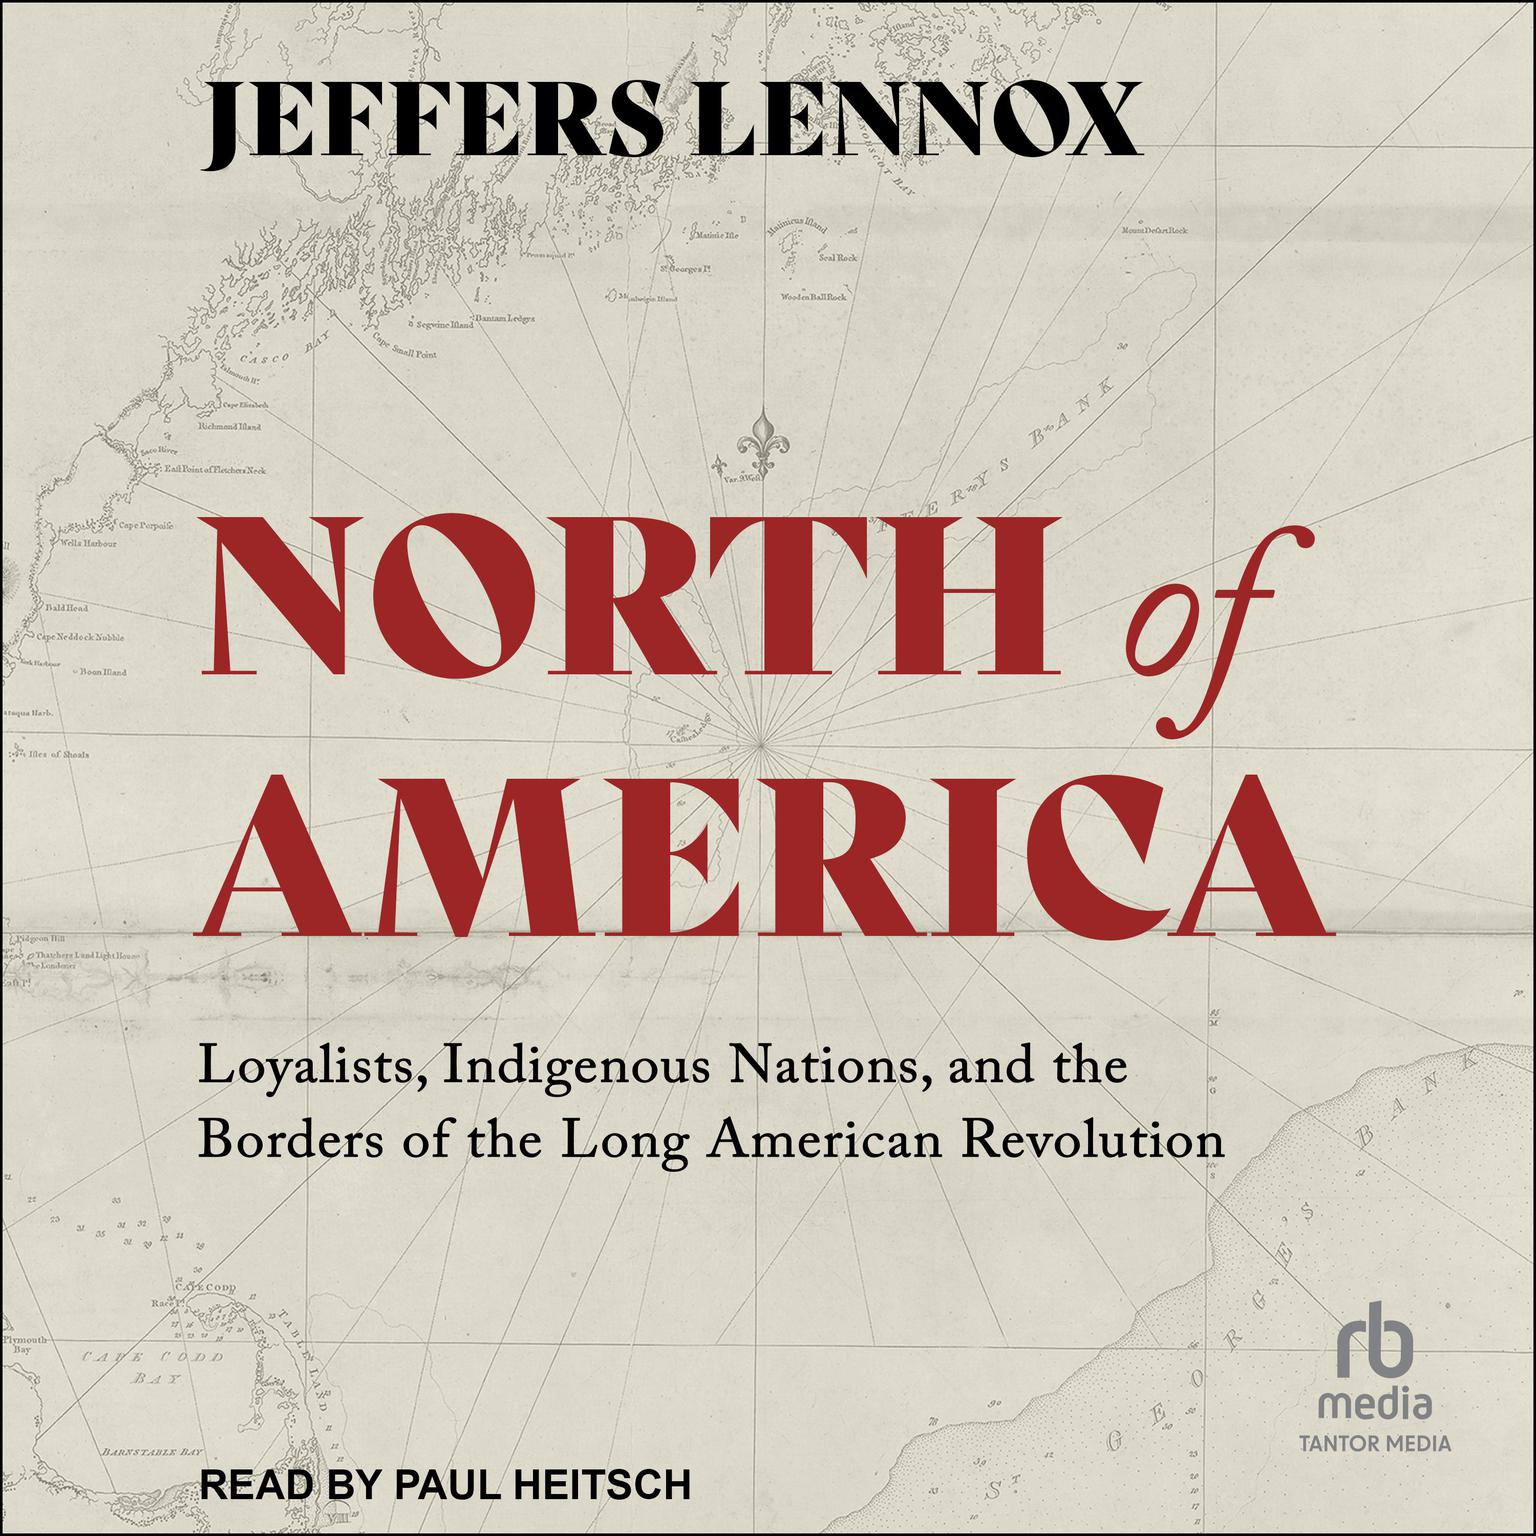 North of America: Loyalists, Indigenous Nations, and the Borders of the Long American Revolution Audiobook, by Jeffers Lennox